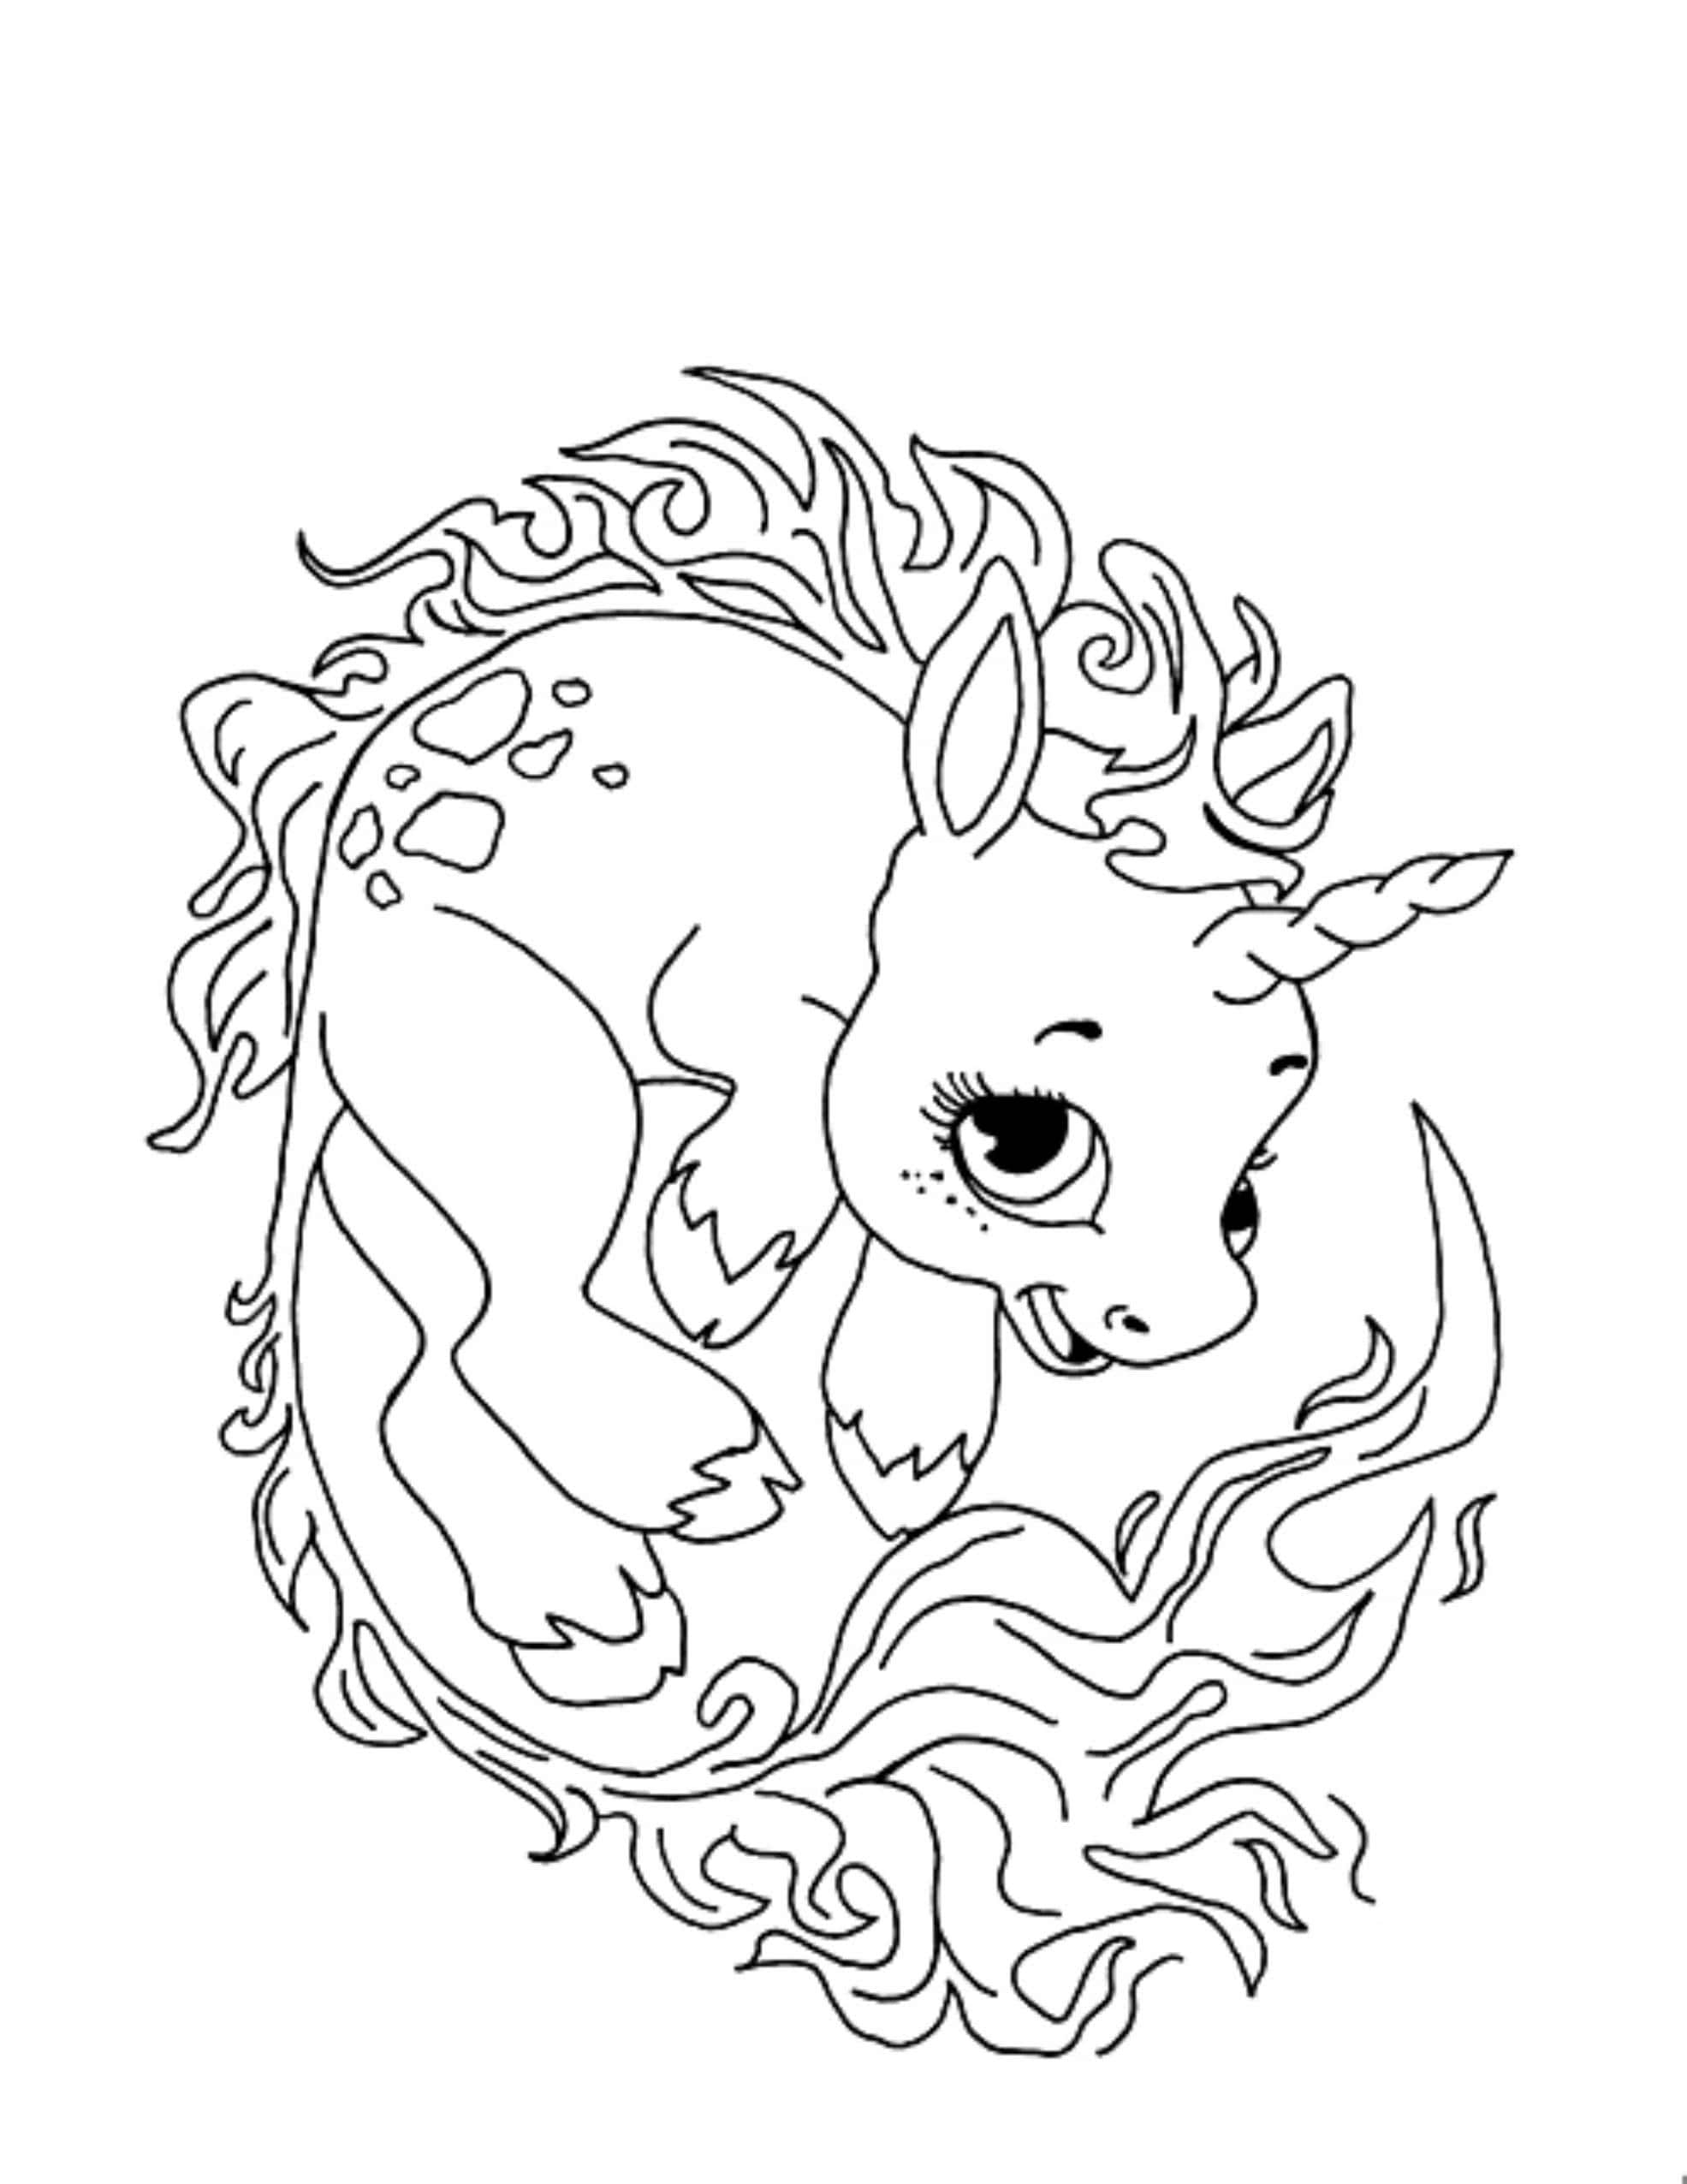 Unicorno Coloring Pages Unicorn Coloring Pages 100 Black And White Pictures Print Themonline